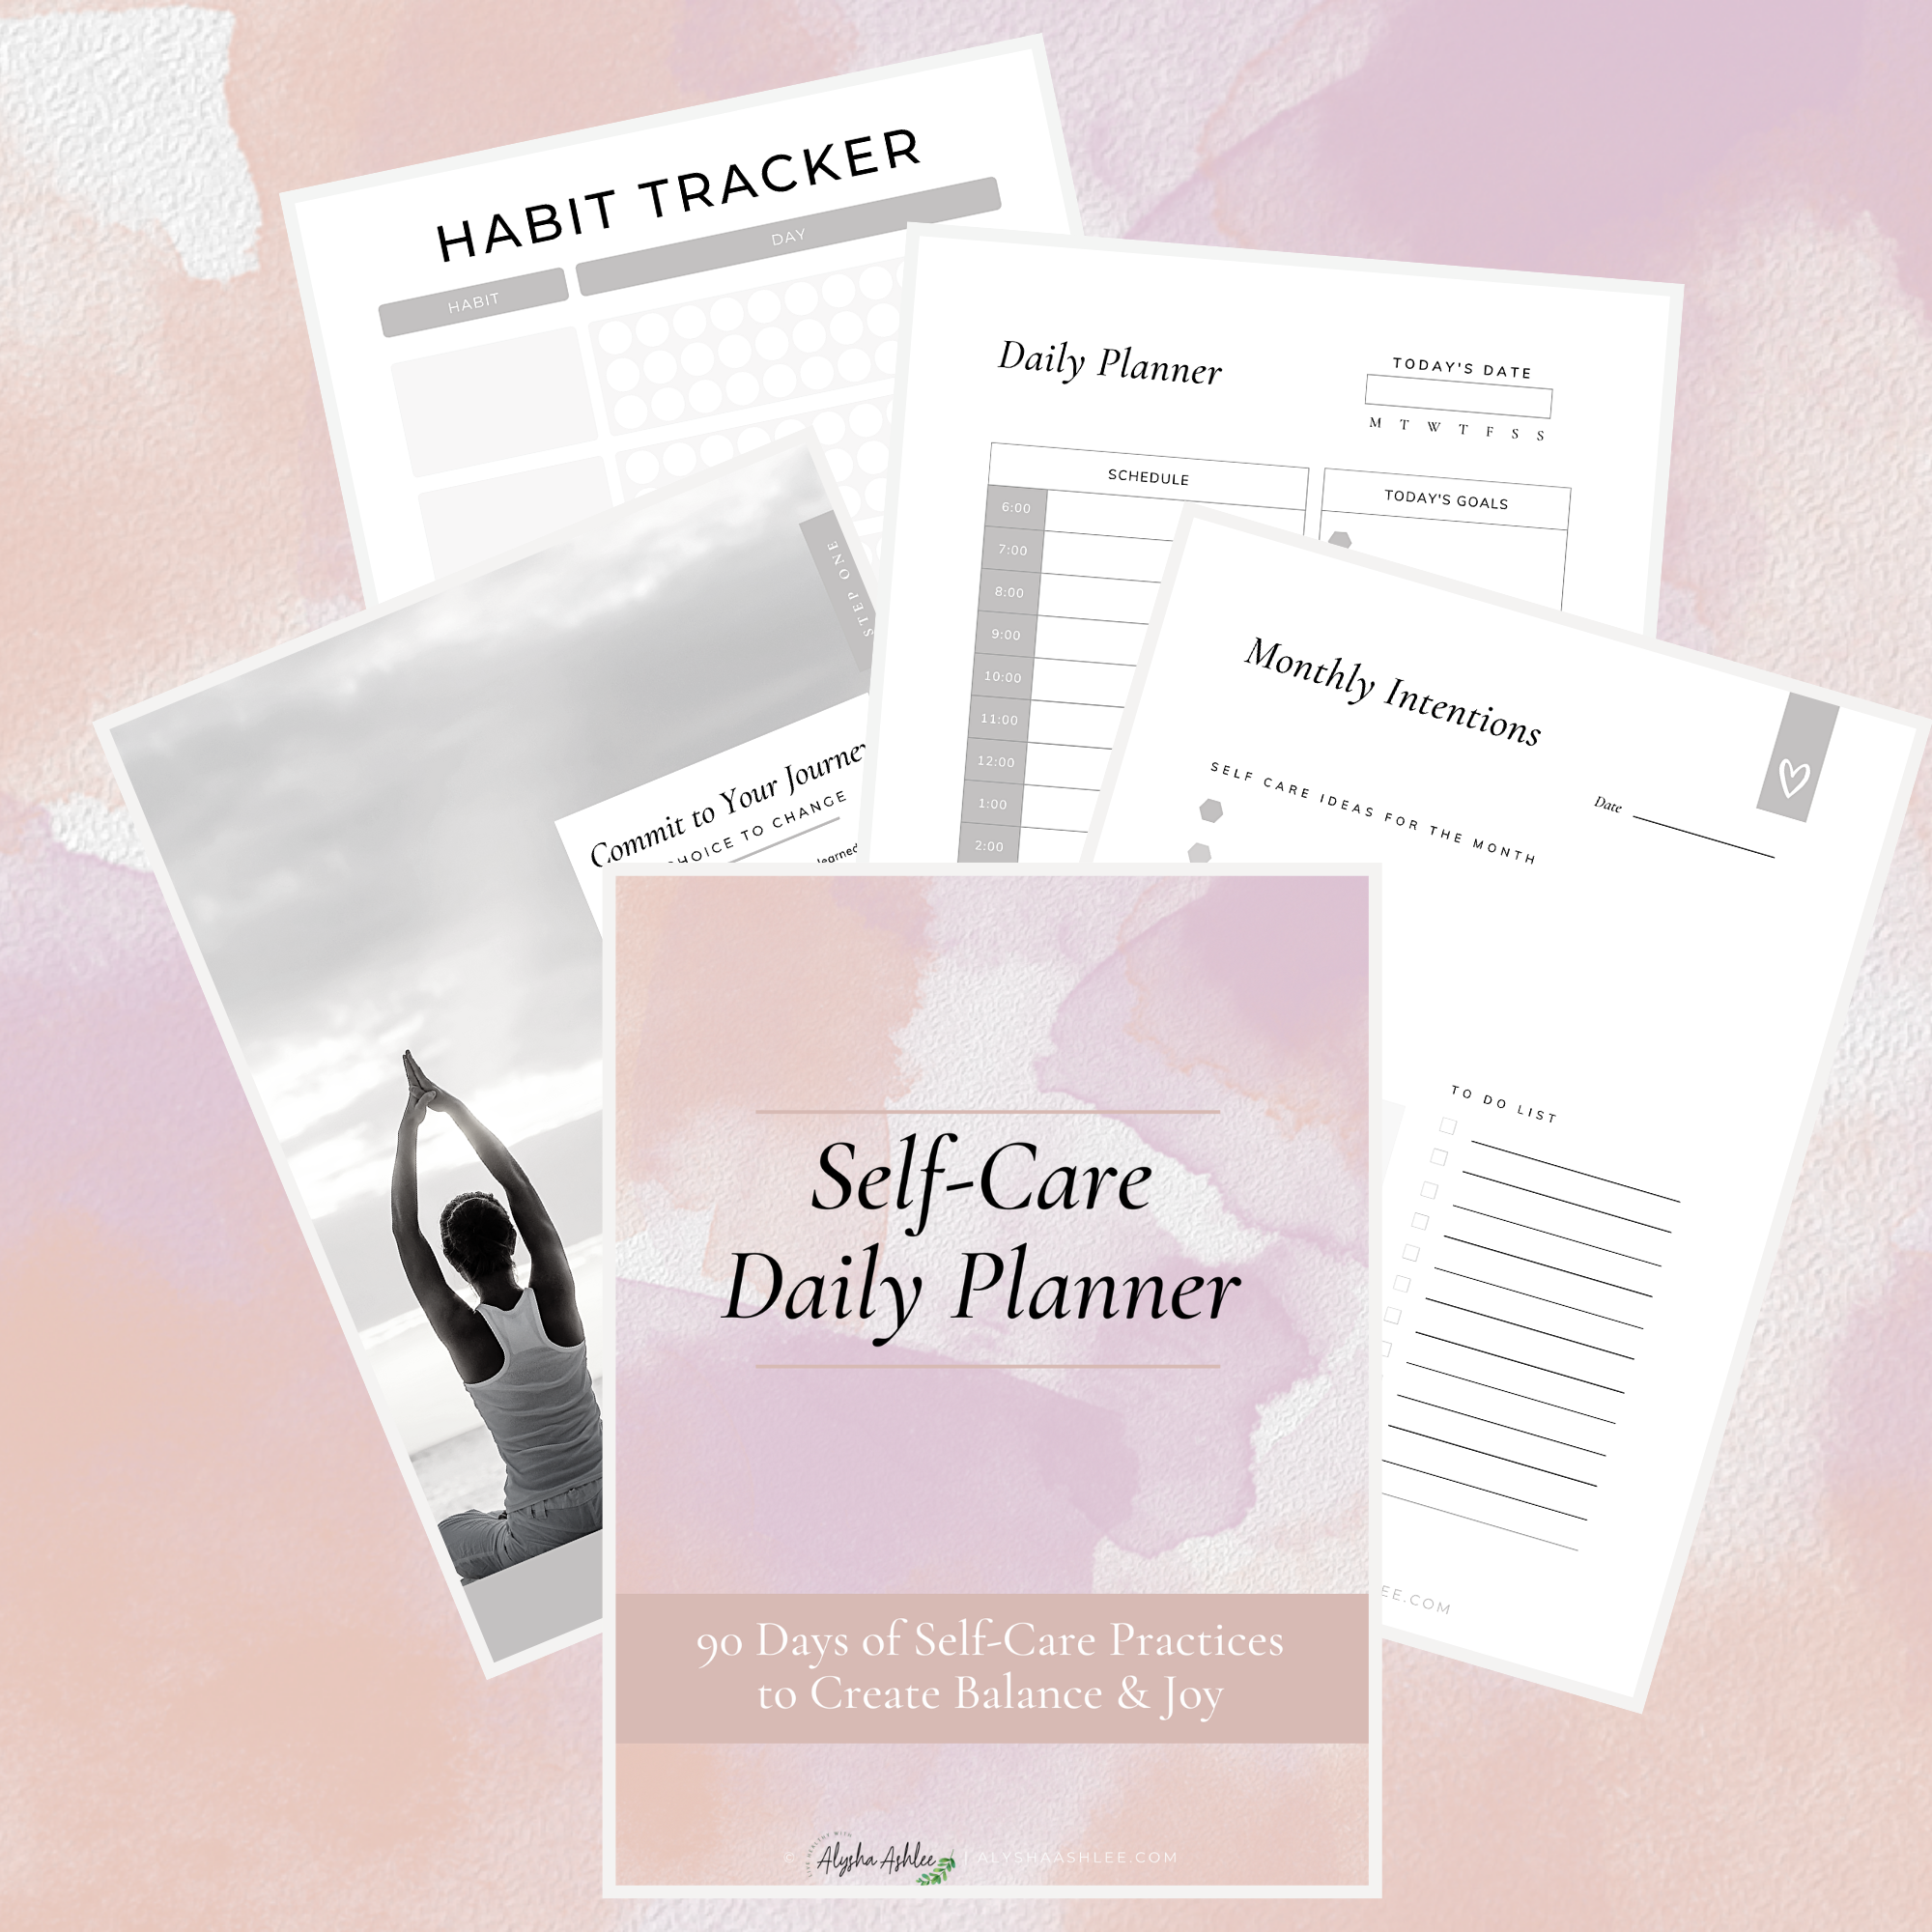 Self-Care Daily Planner (PRINTED COPY)